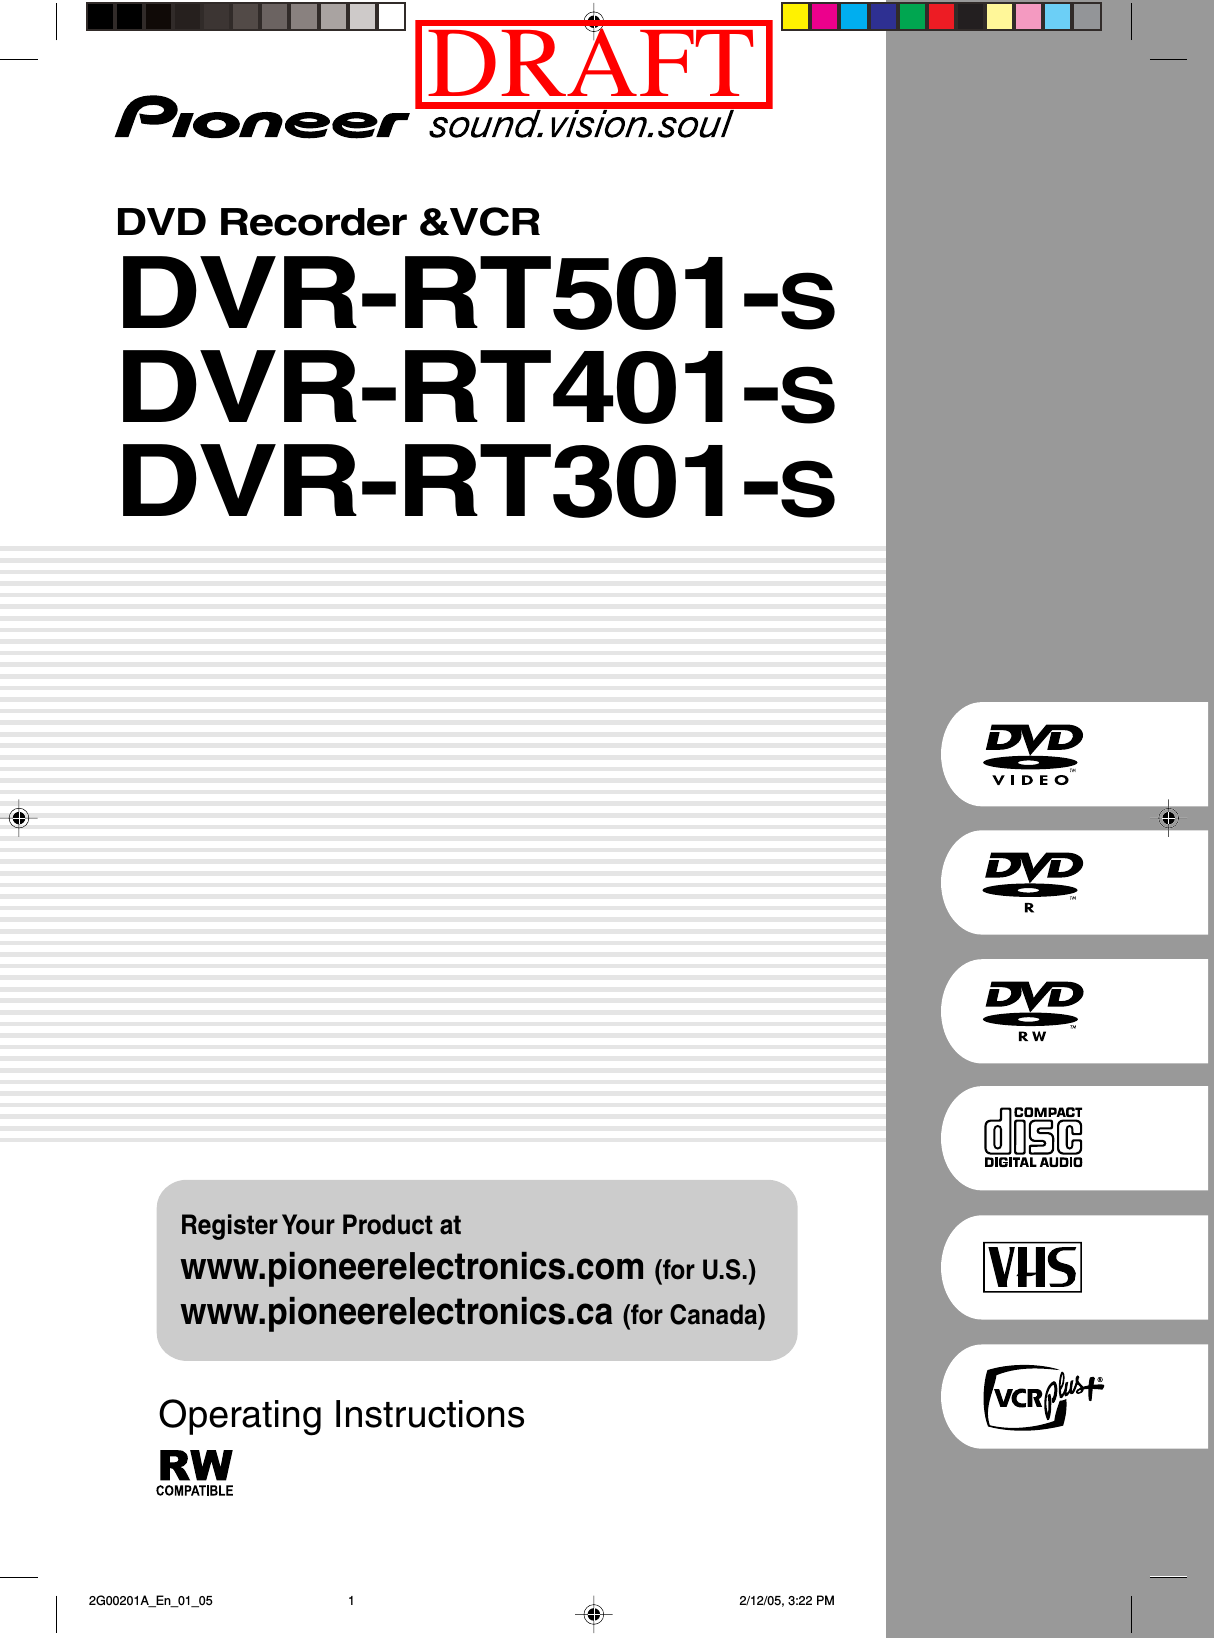 Operating InstructionsRegister Your Product atwww.pioneerelectronics.com (for U.S.)www.pioneerelectronics.ca (for Canada)DVD Recorder &amp;VCRDVR-RT501-SDVR-RT401-SDVR-RT301-S 2G00201A_En_01_05 2/12/05, 3:22 PM1DRAFT